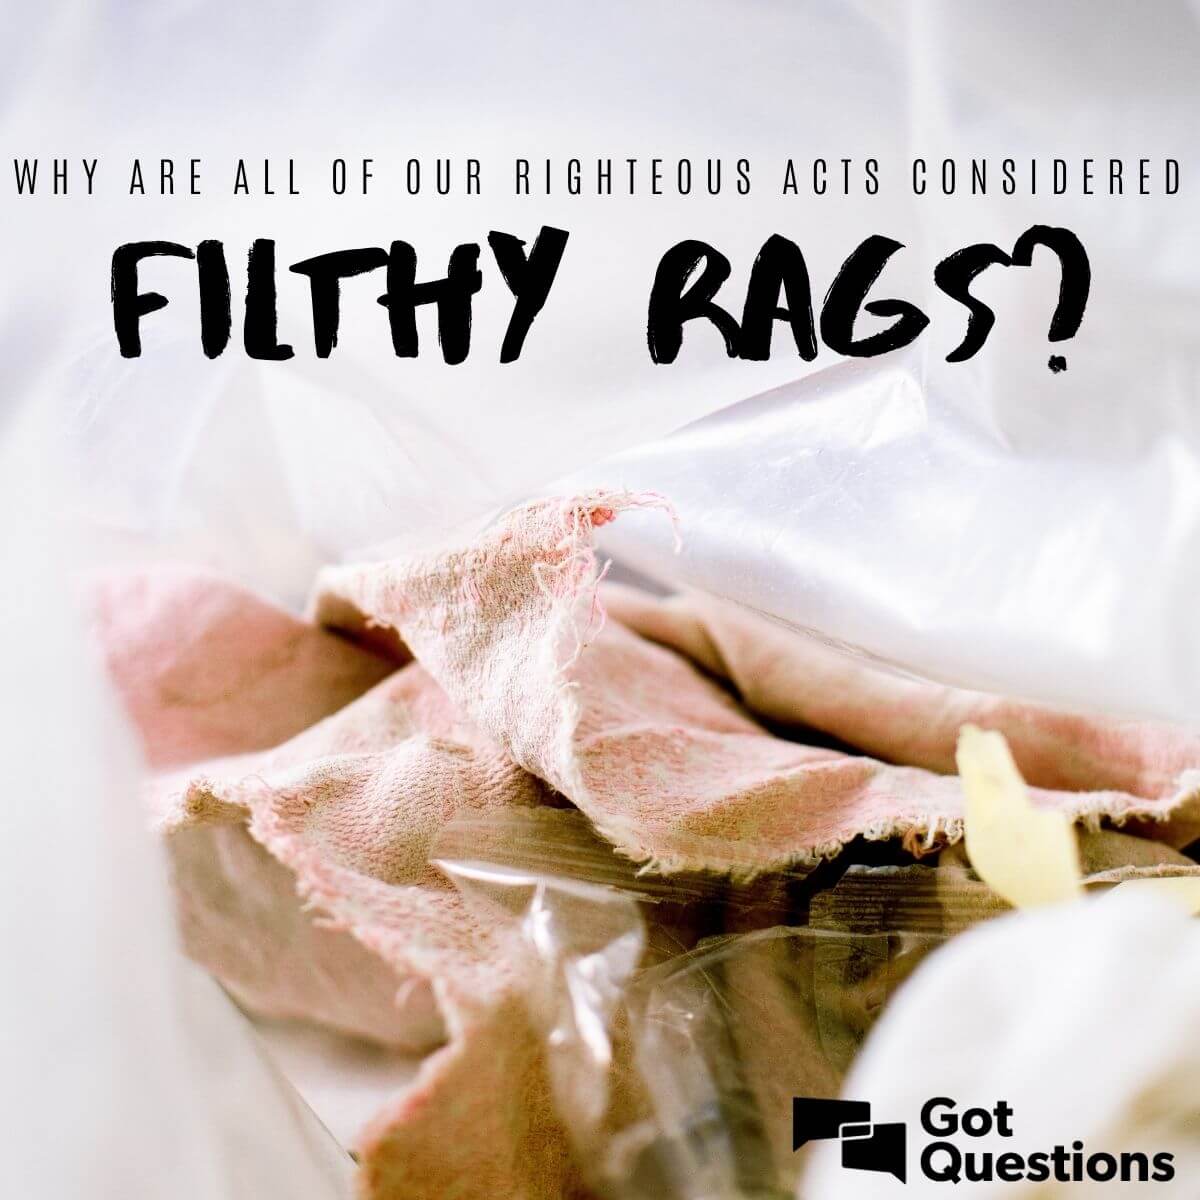 what is meant by filthy rags